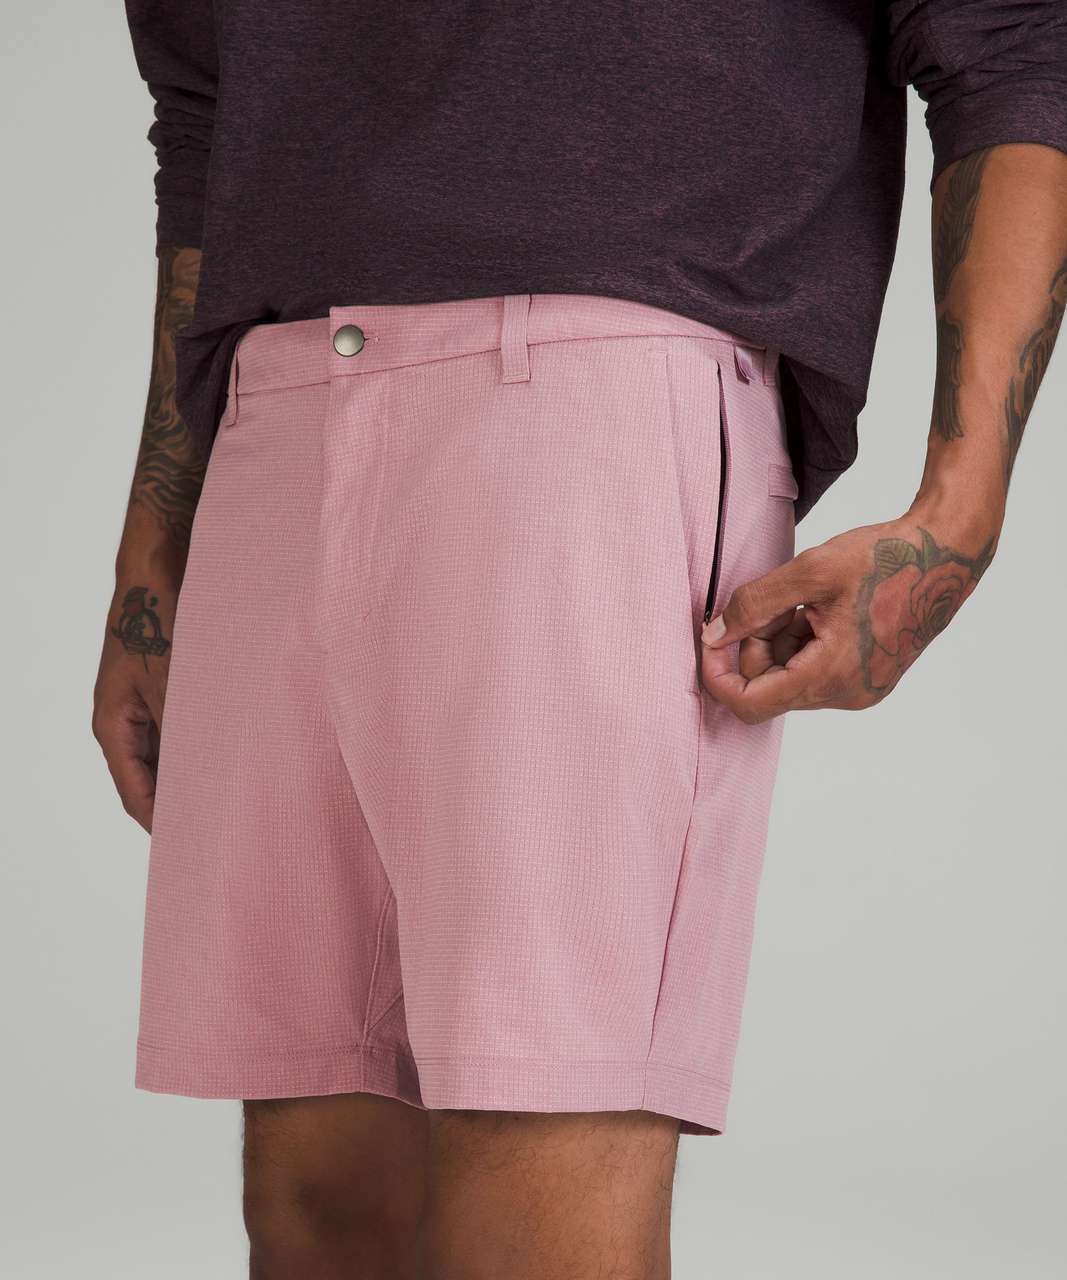 Lululemon Commission Classic-Fit Short 7" *Ventlight - Heathered Pink Taupe